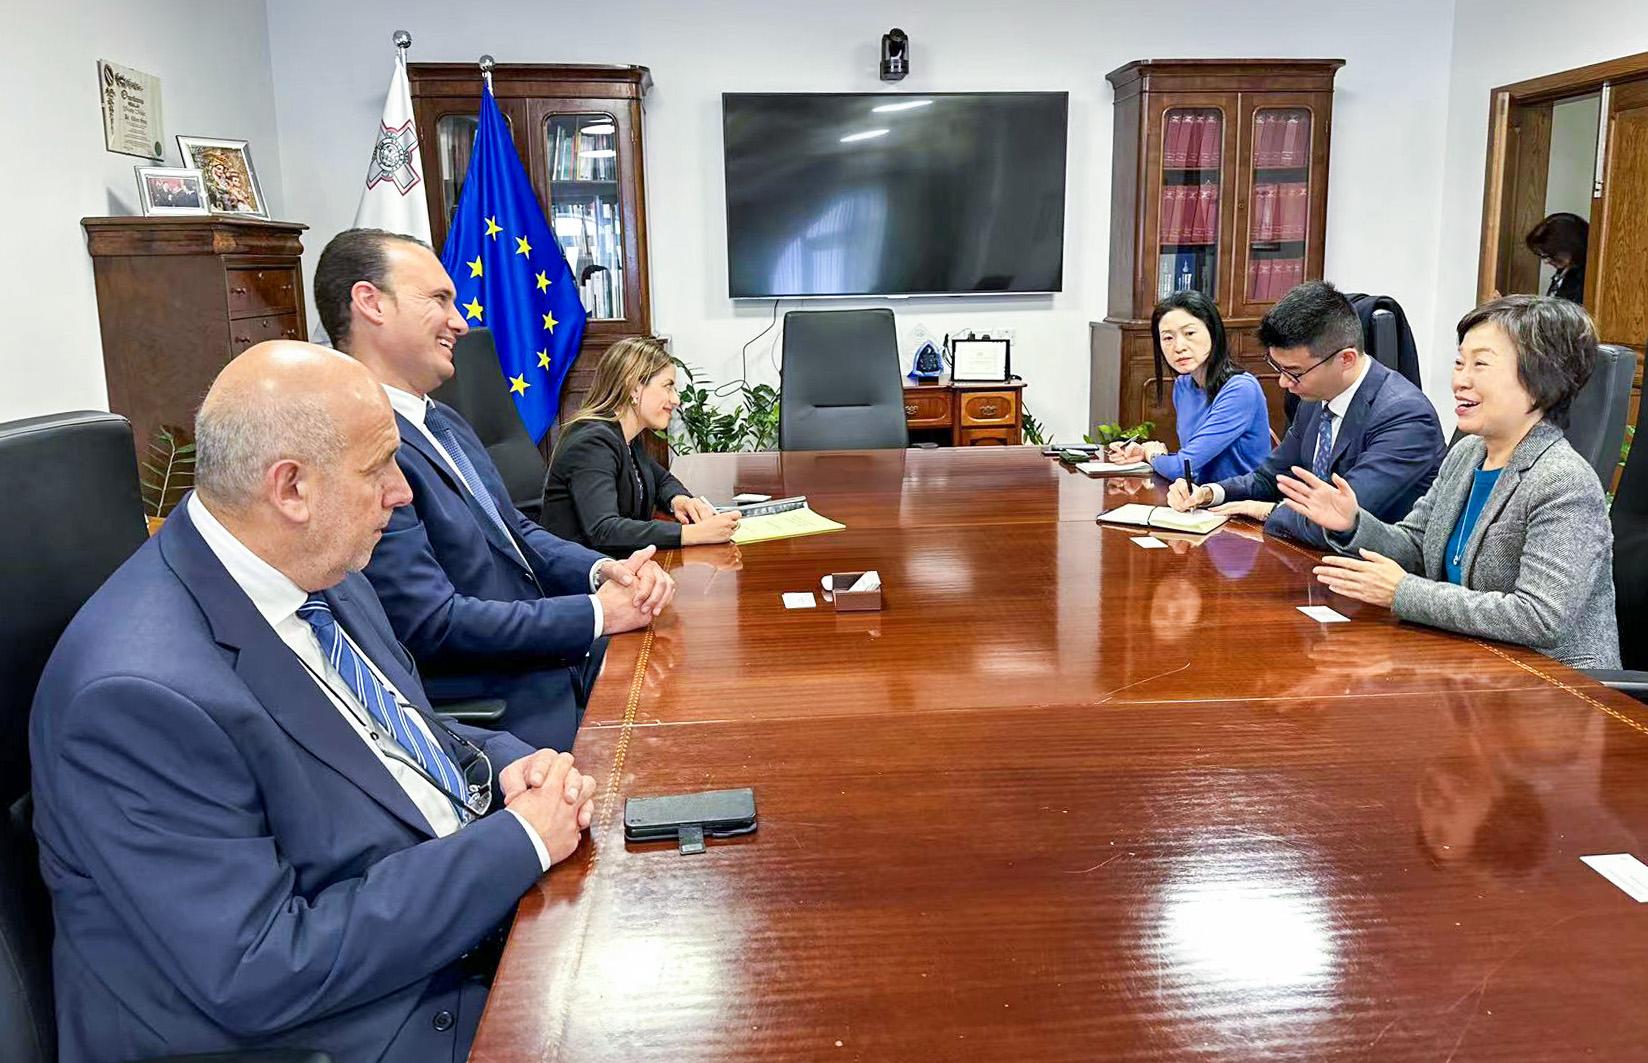 The Secretary for Education, Dr Choi Yuk-lin (first right), meets the Minister for Education, Sport, Youth, Research and Innovation, Dr Clifton Grima (second left), in Malta on April 17 (Malta time).